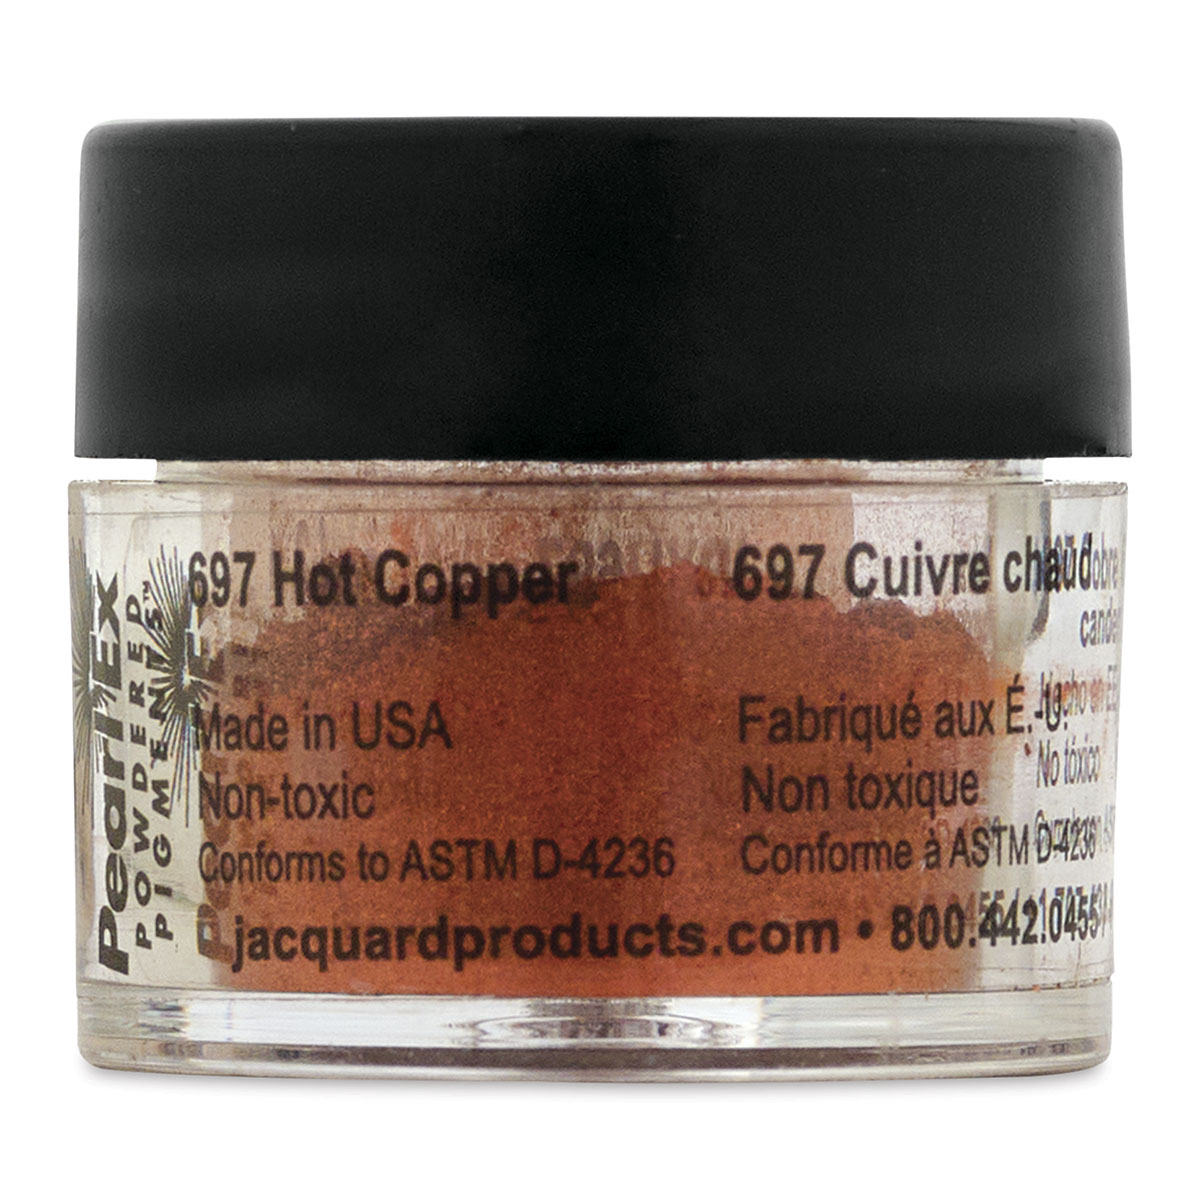 Jacquard Products Pearl Ex Powdered Pigments - Hot Copper - Scrapbooking  Made Simple